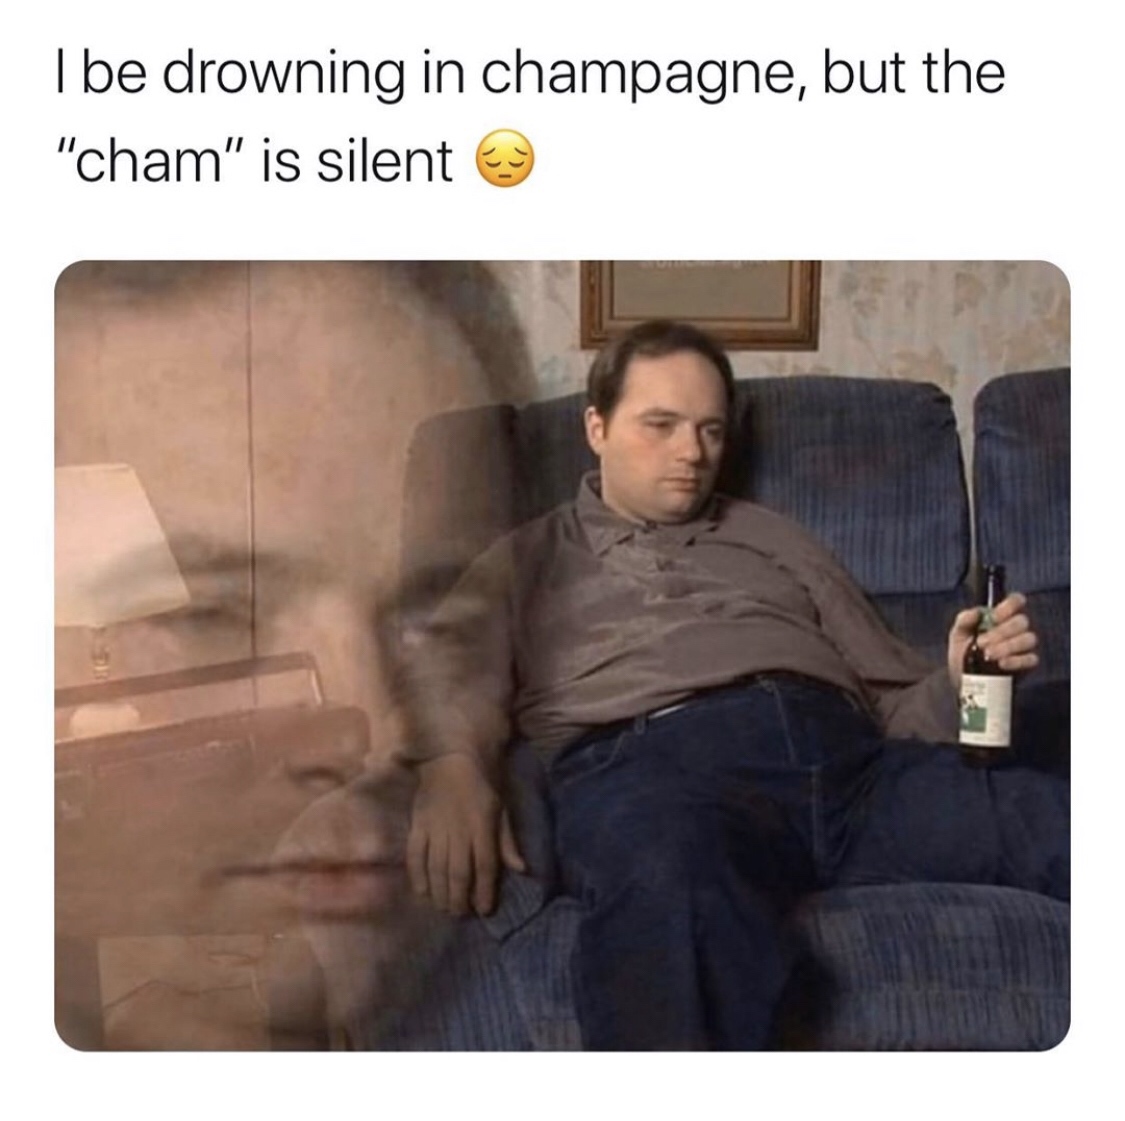 drowning in champagne but the cham is silent - I be drowning in champagne, but the "cham" is silent